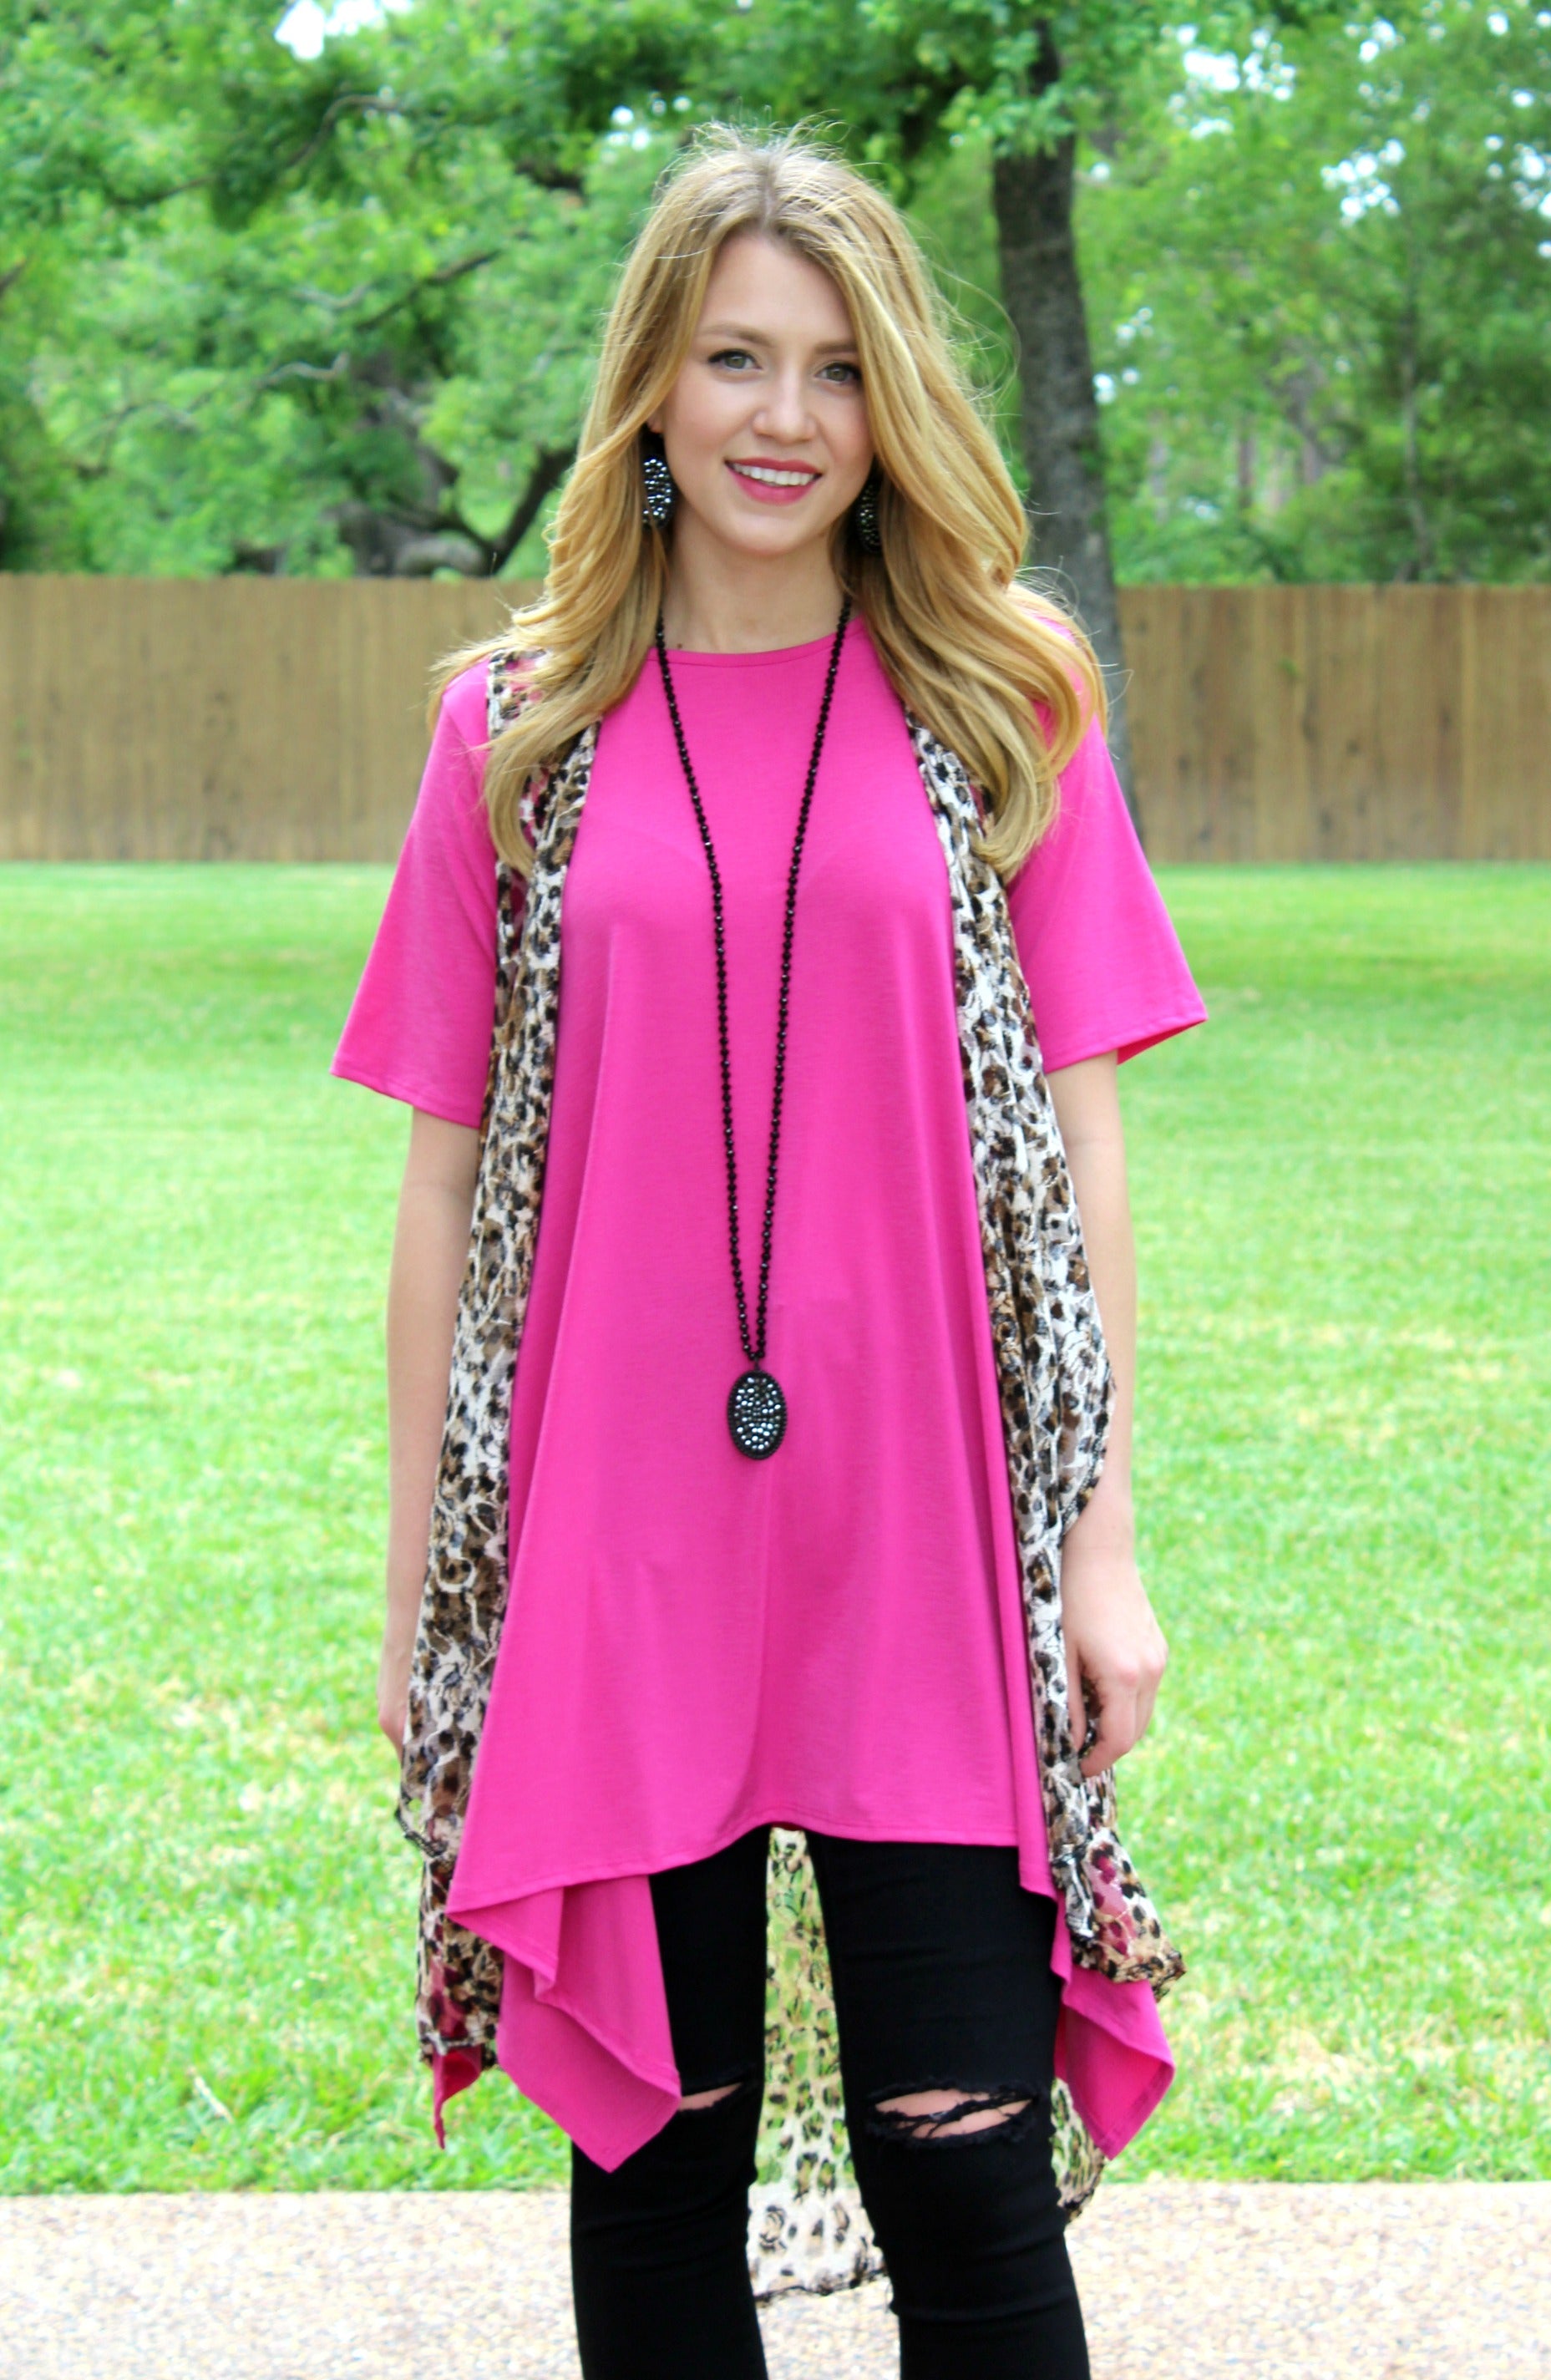 Last Chance Size S & M | Not A Doubt Asymmetrical Hemline Tunic in Hot Pink - Giddy Up Glamour Boutique